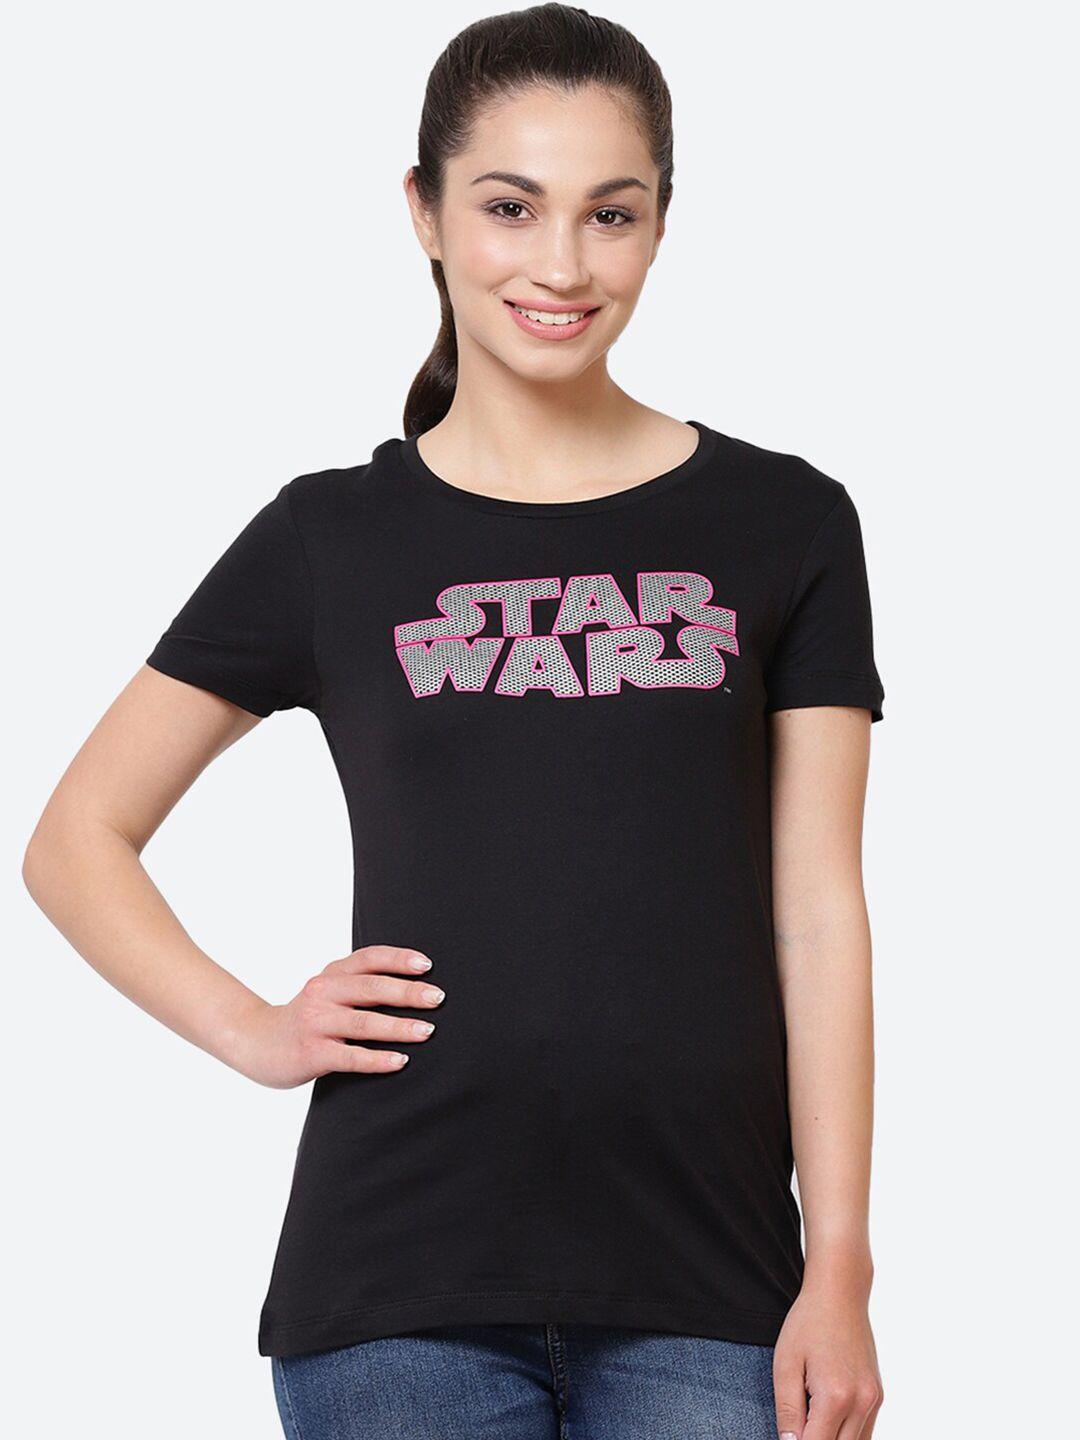 free authority women black star wars printed cut outs t-shirt